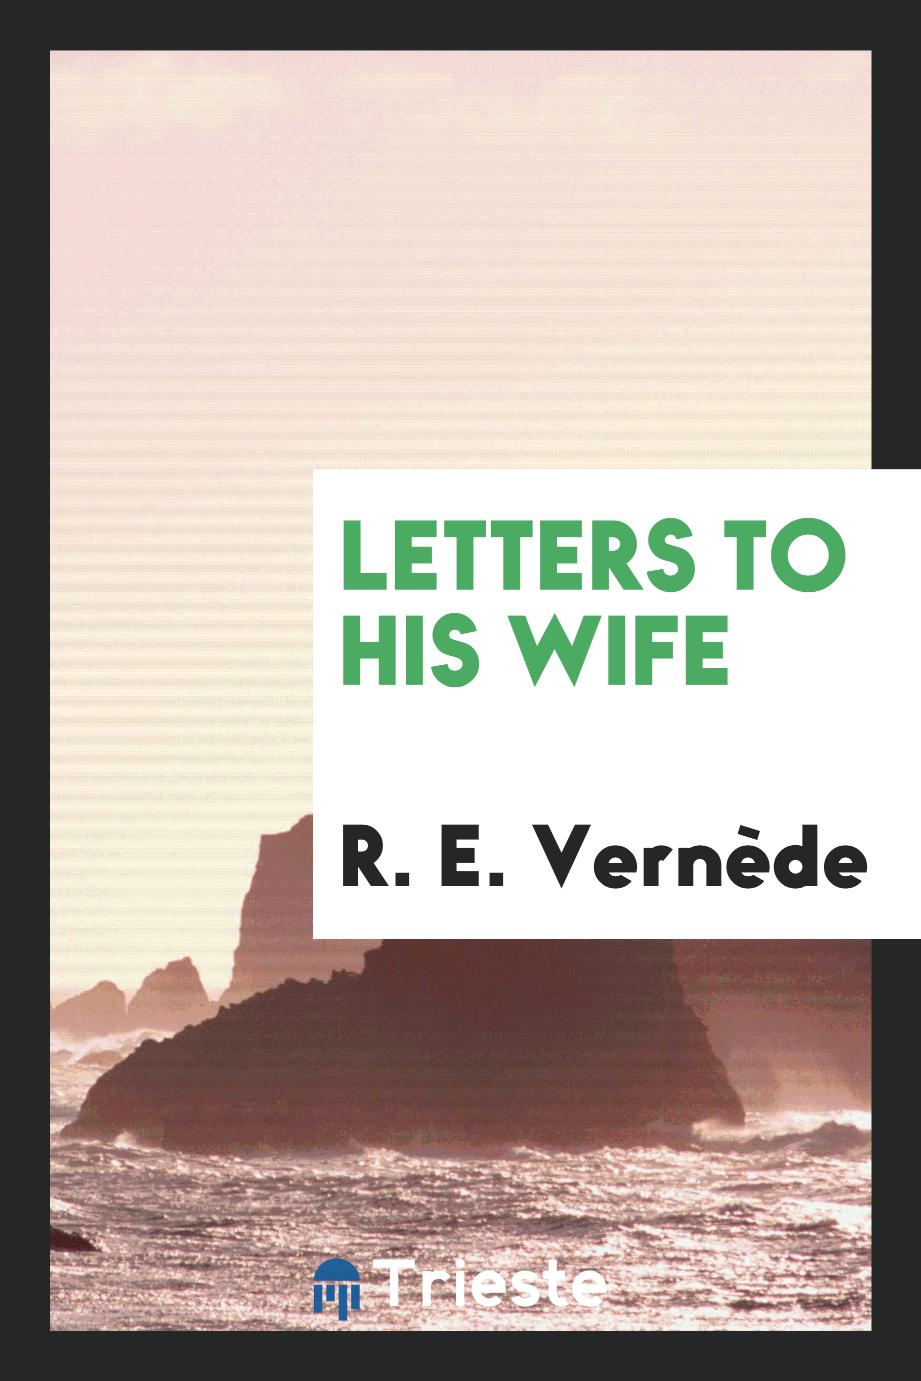 Letters to his wife